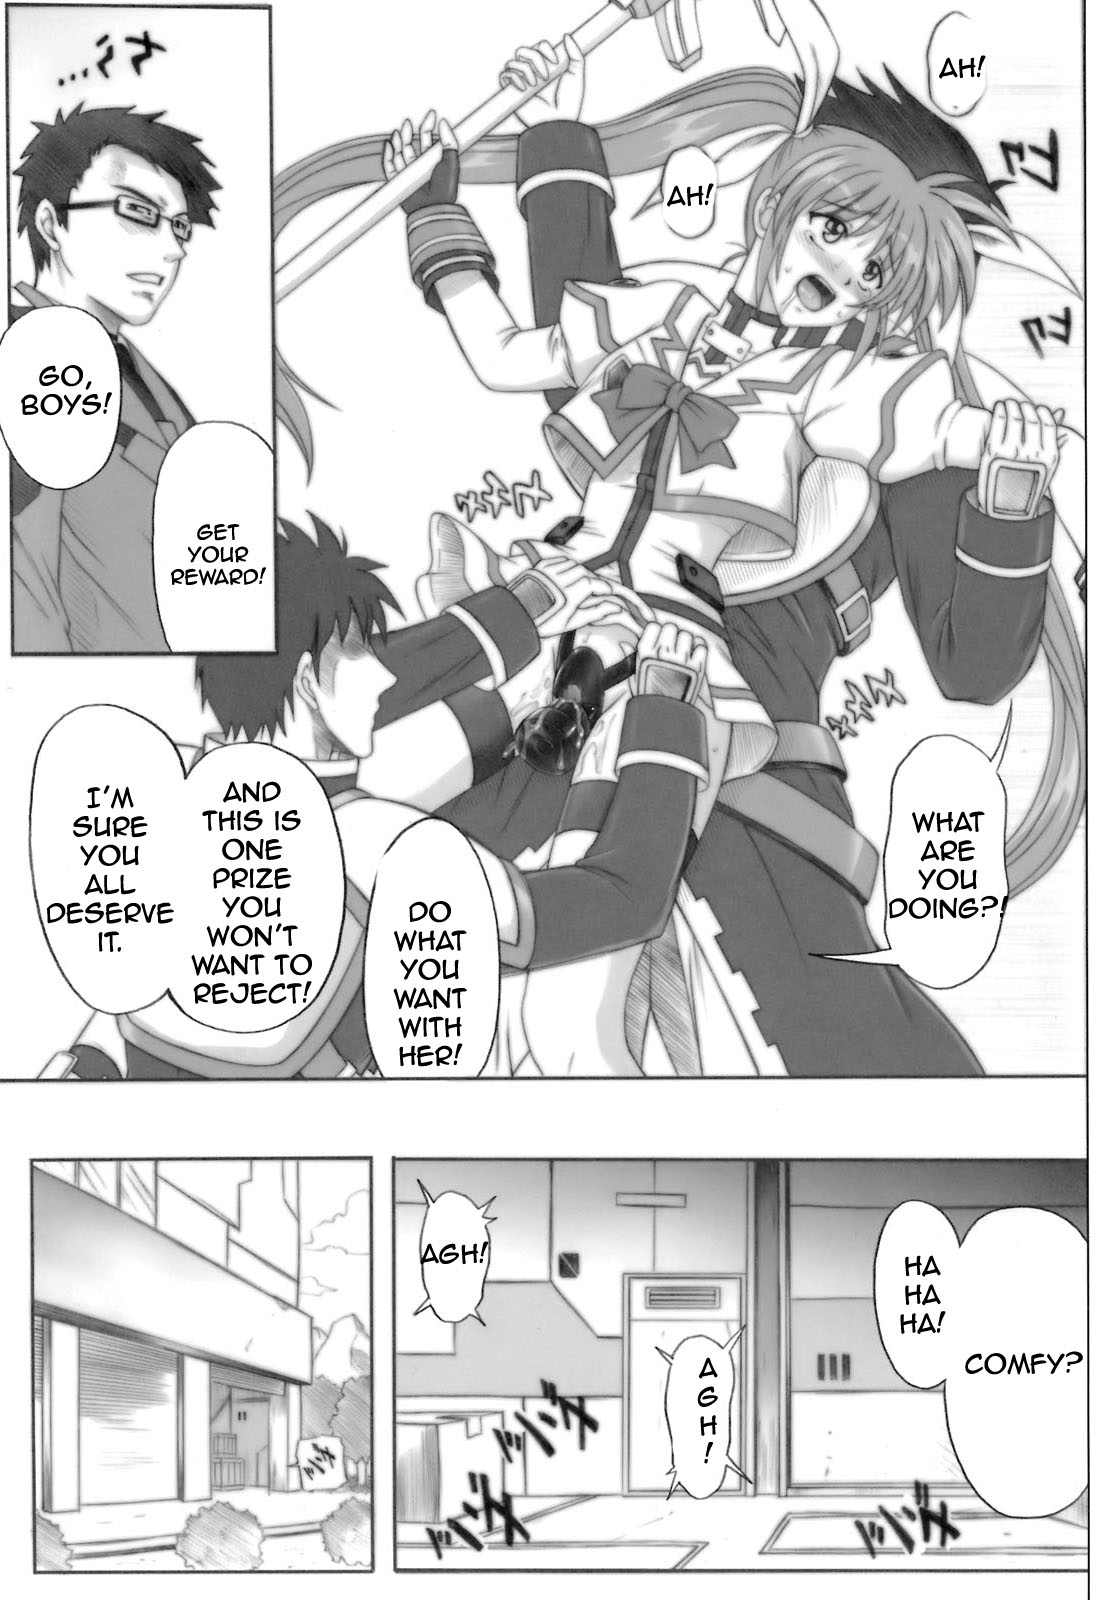 840 Color Classic Situation Note Extention (Mahou Shoujo Lyrical Nanoha) [English] [Rewrite] page 29 full